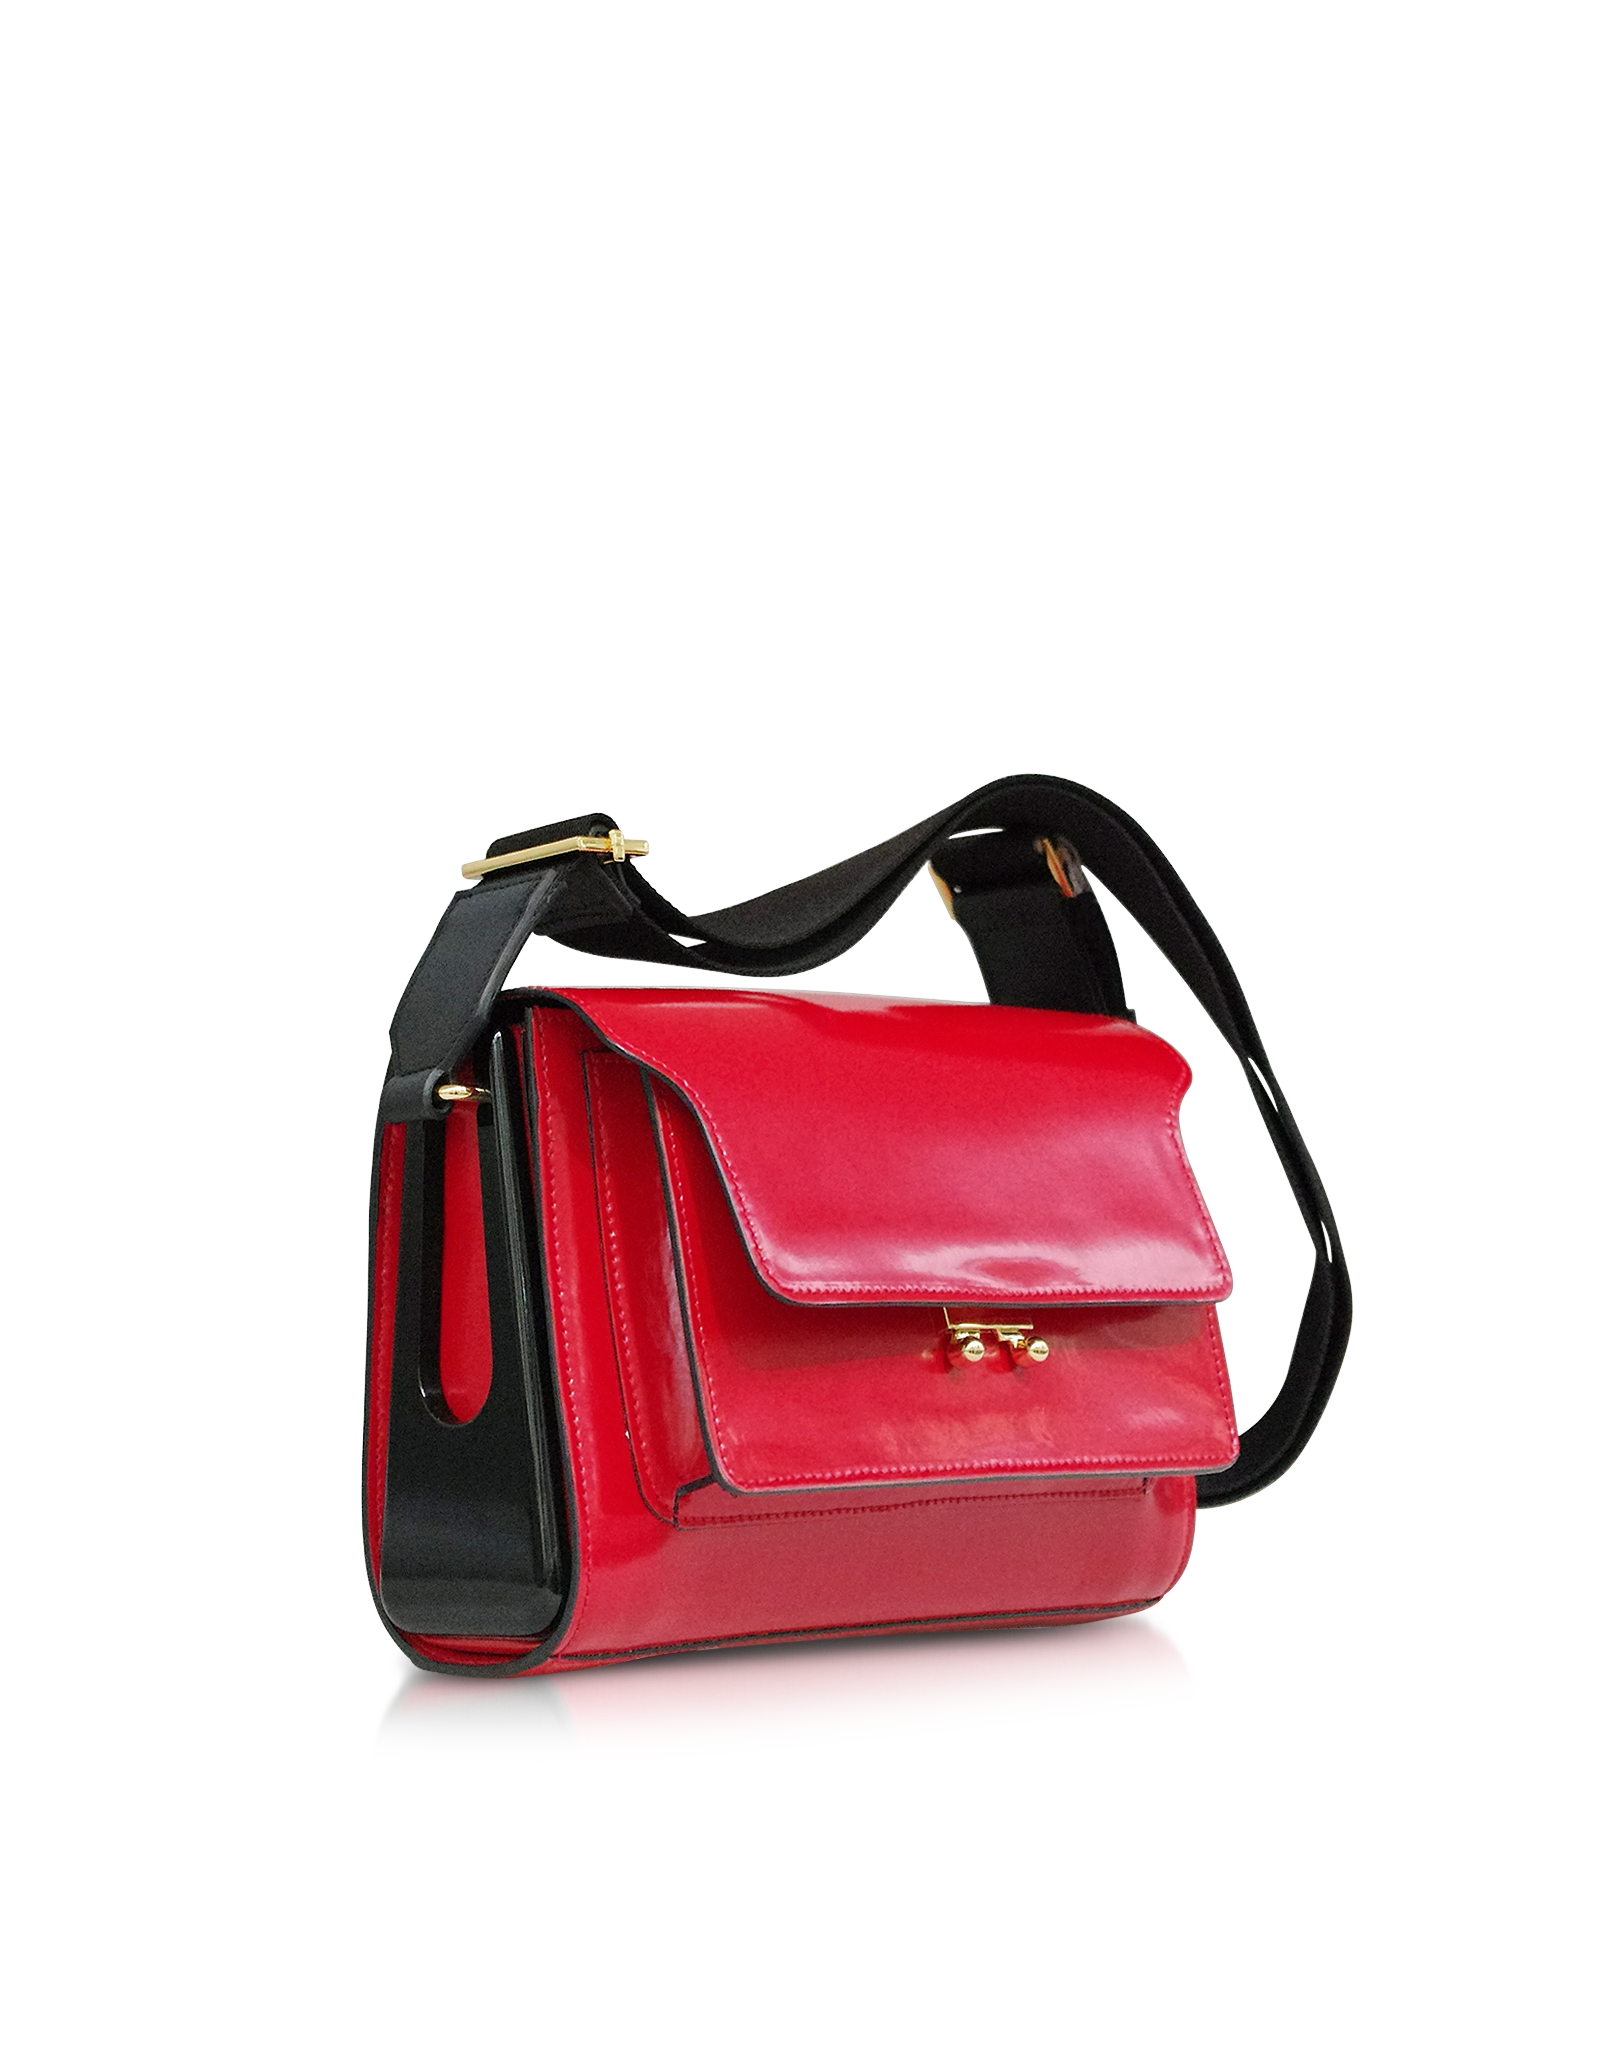 Red Patent Leather Bag | SEMA Data Co-op